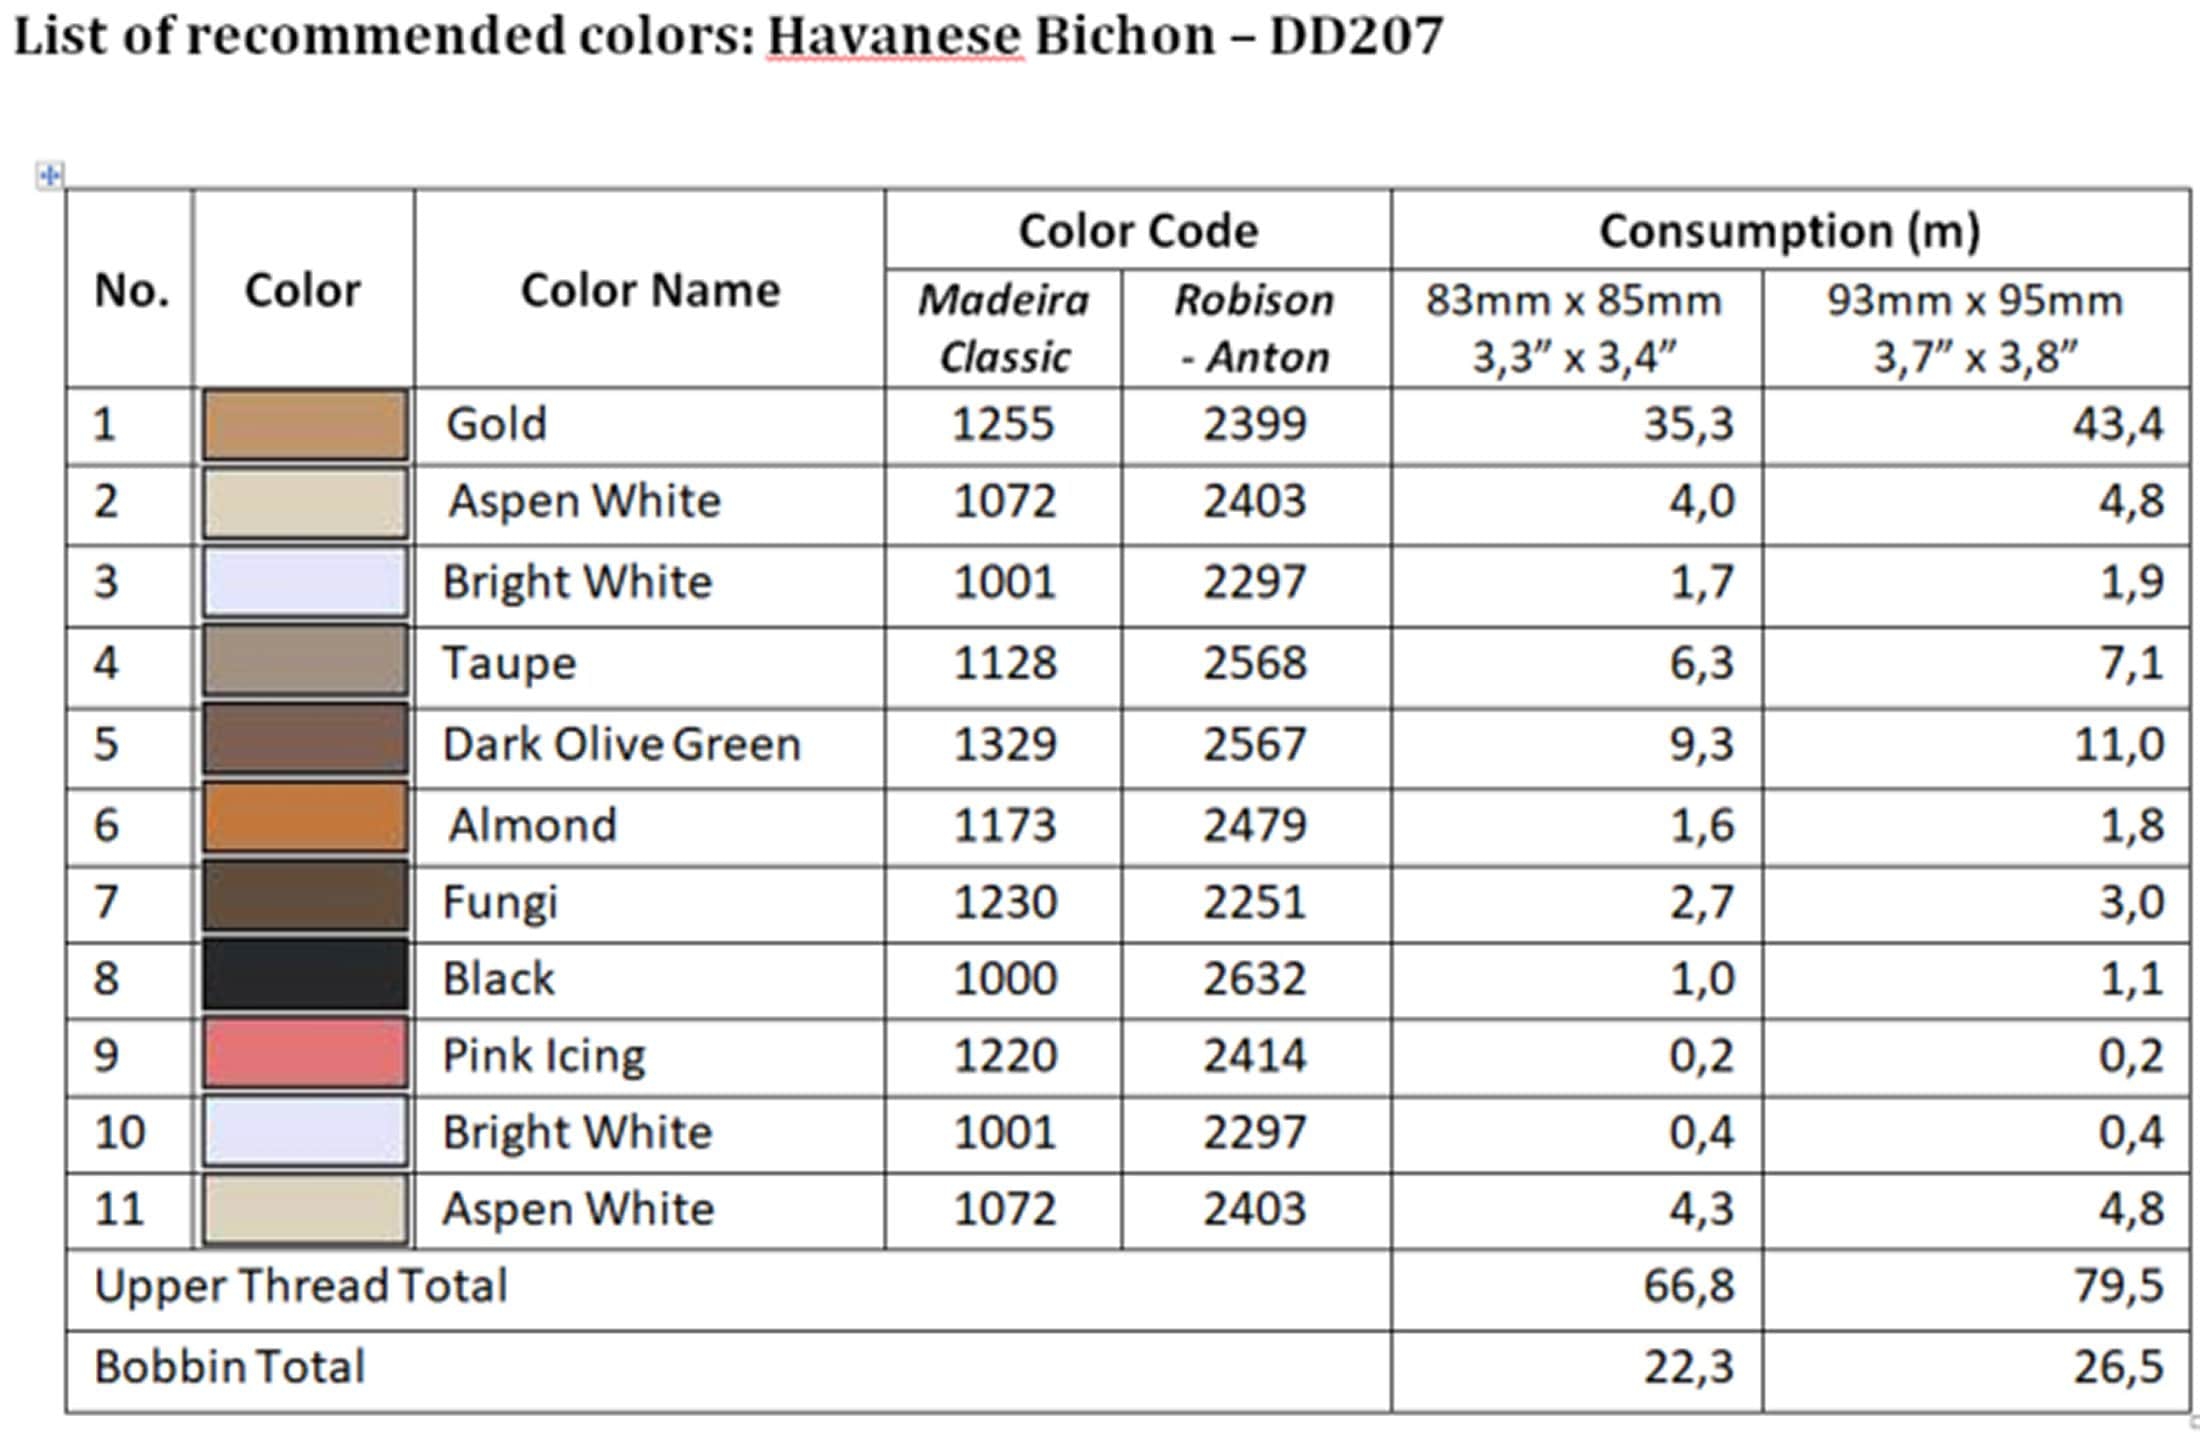 List of recommended colors - DD207